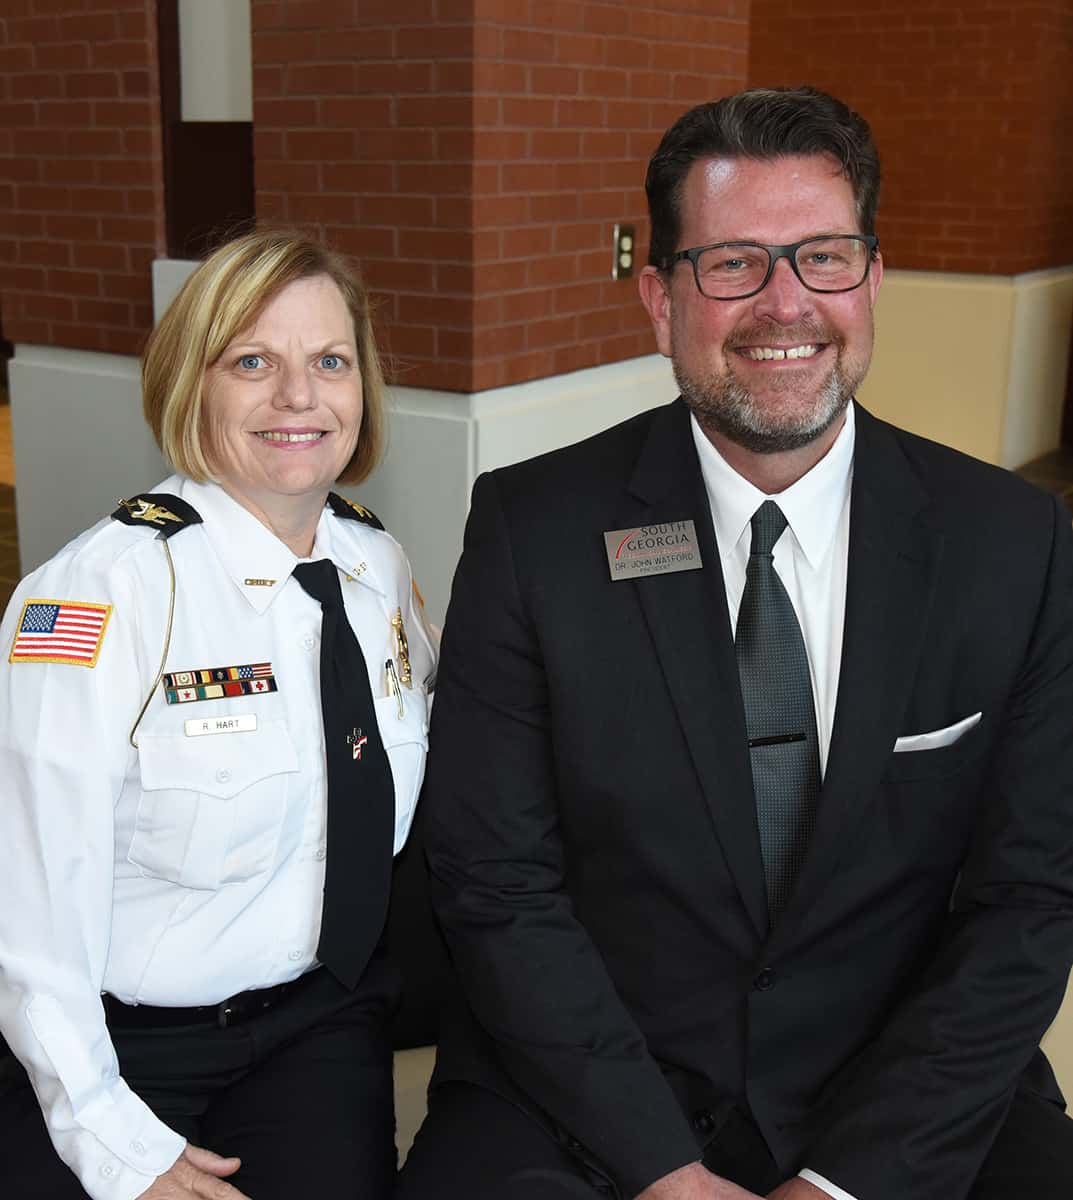 Rachel Hart, the Police Chief for Oglethorpe, left, is shown above with South Georgia Technical College President Dr. John Watford who thanked her for impacting success in her community.